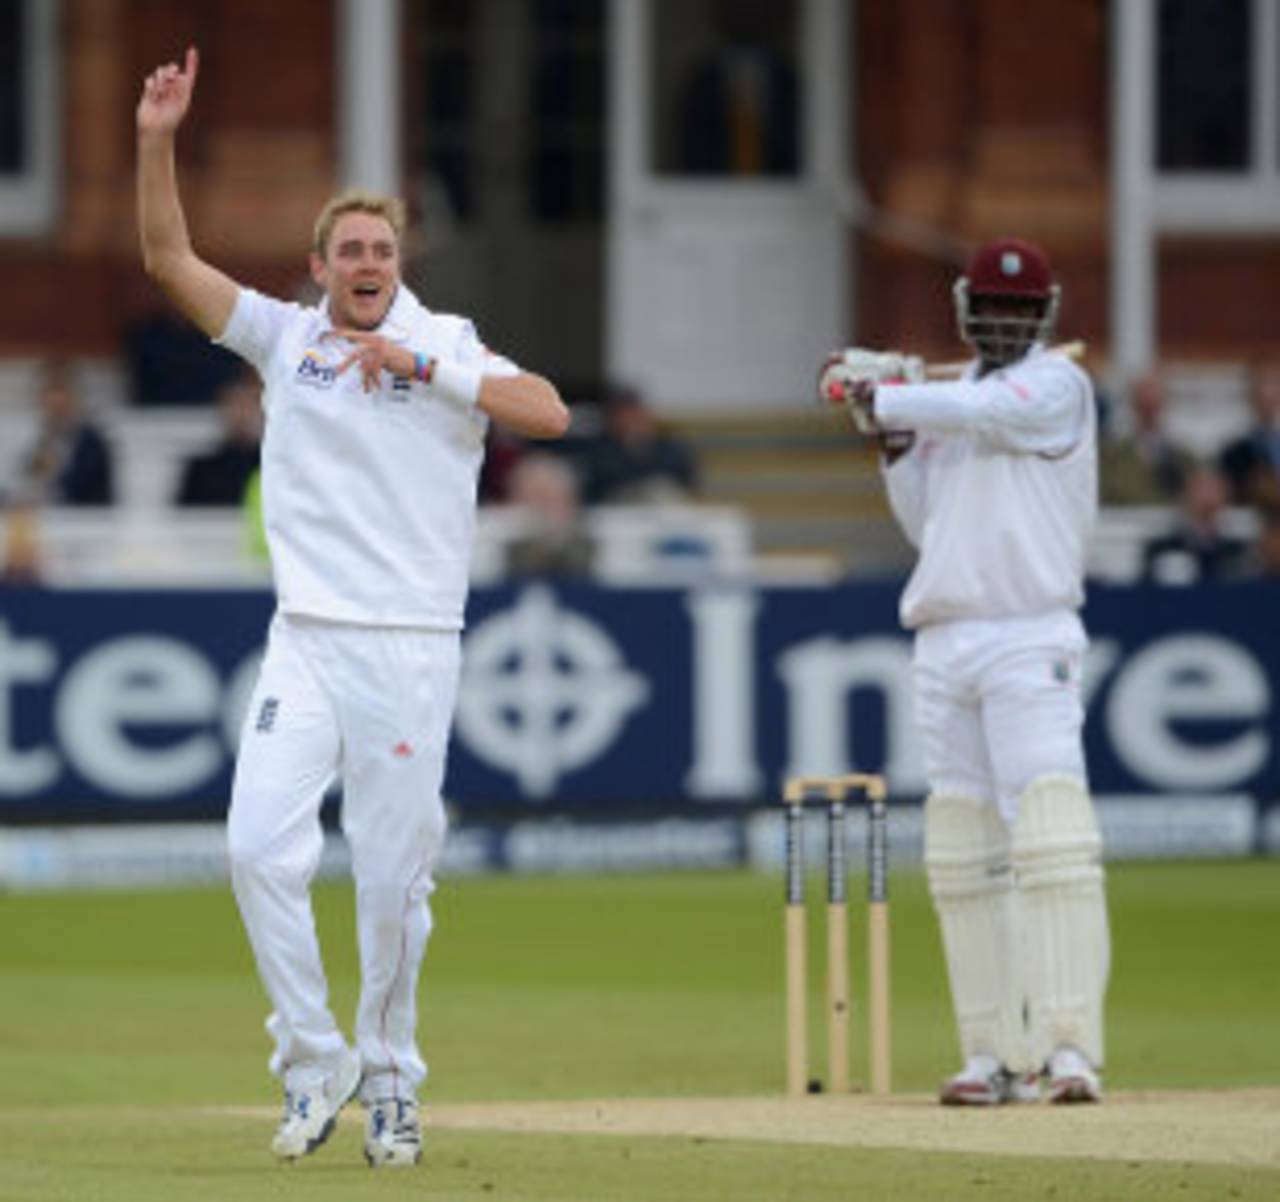 Stuart Broad claimed a few more landmarks with the ball, England v West Indies, 1st Test, Lord's, 4th day, May 20, 2012